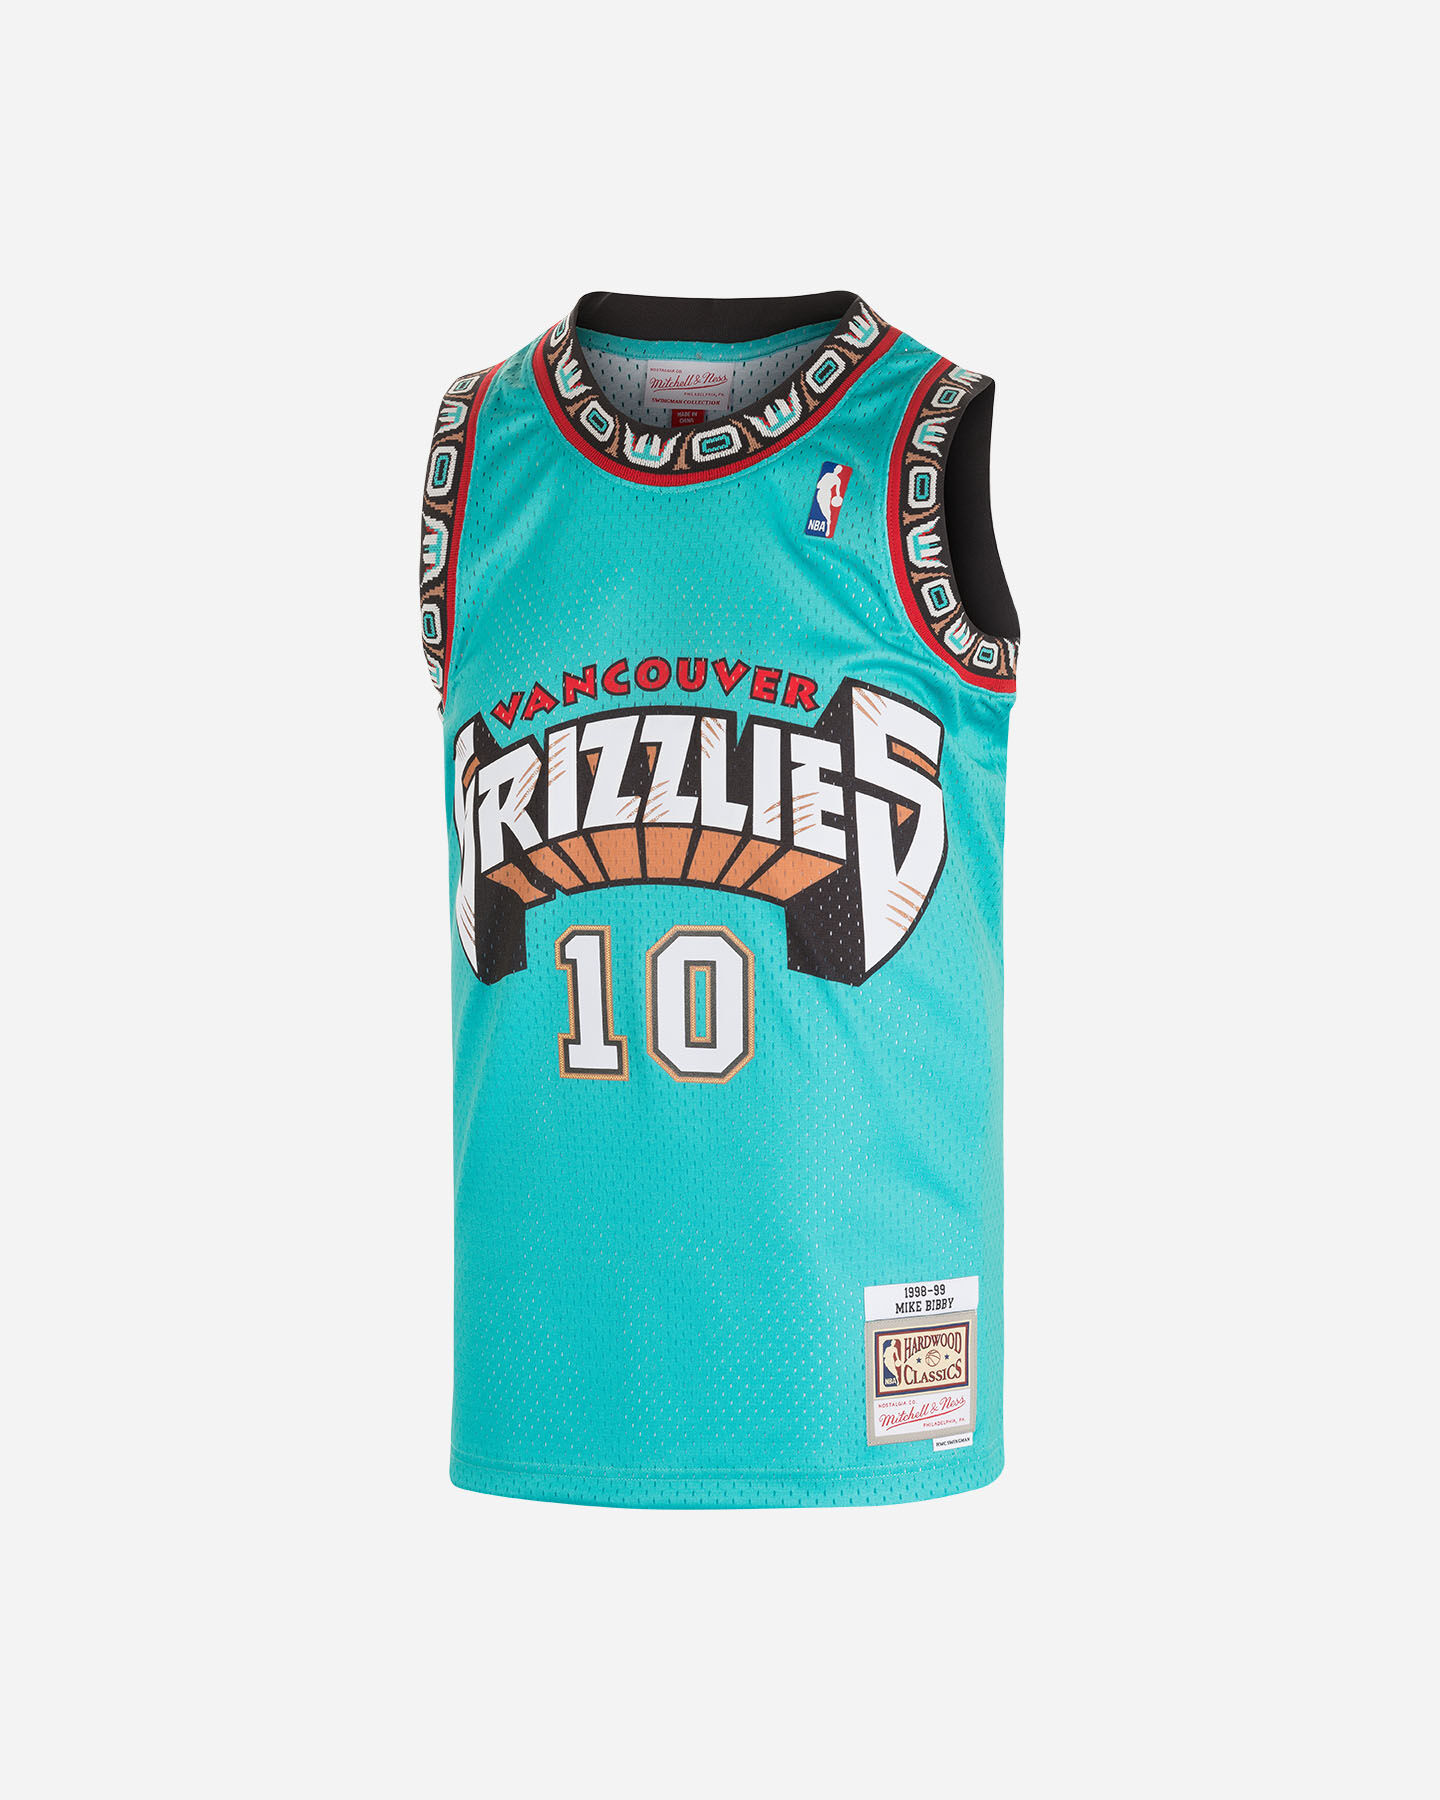  Canotta basket MITCHELL&NESS NBA VANCOUVER GRIZZLIES MIKE BIBBY ' M S4105958|001|S scatto 0